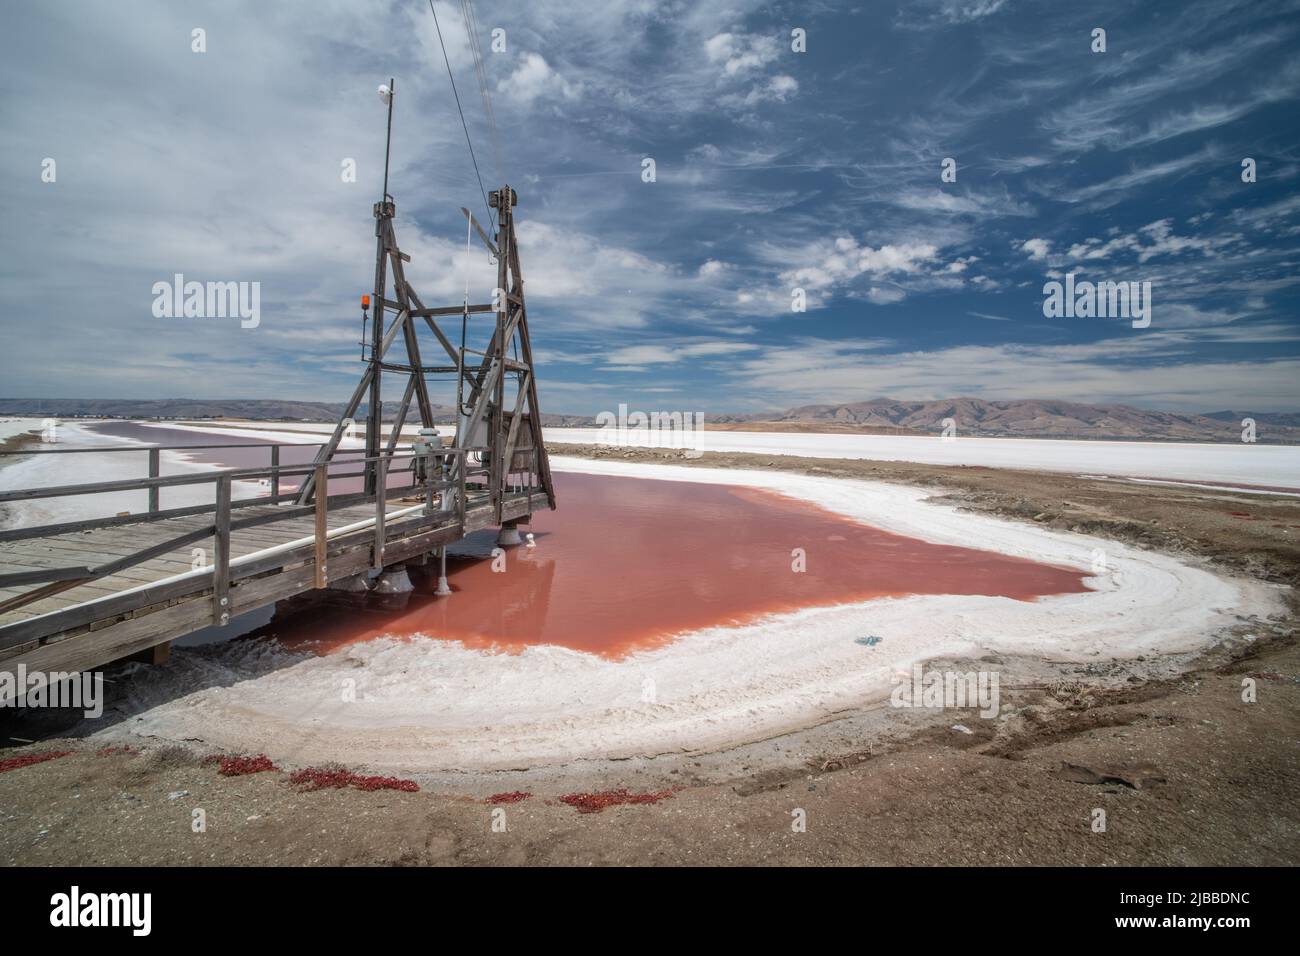 A salt pond with pink water and a wooden platform Stock Photo